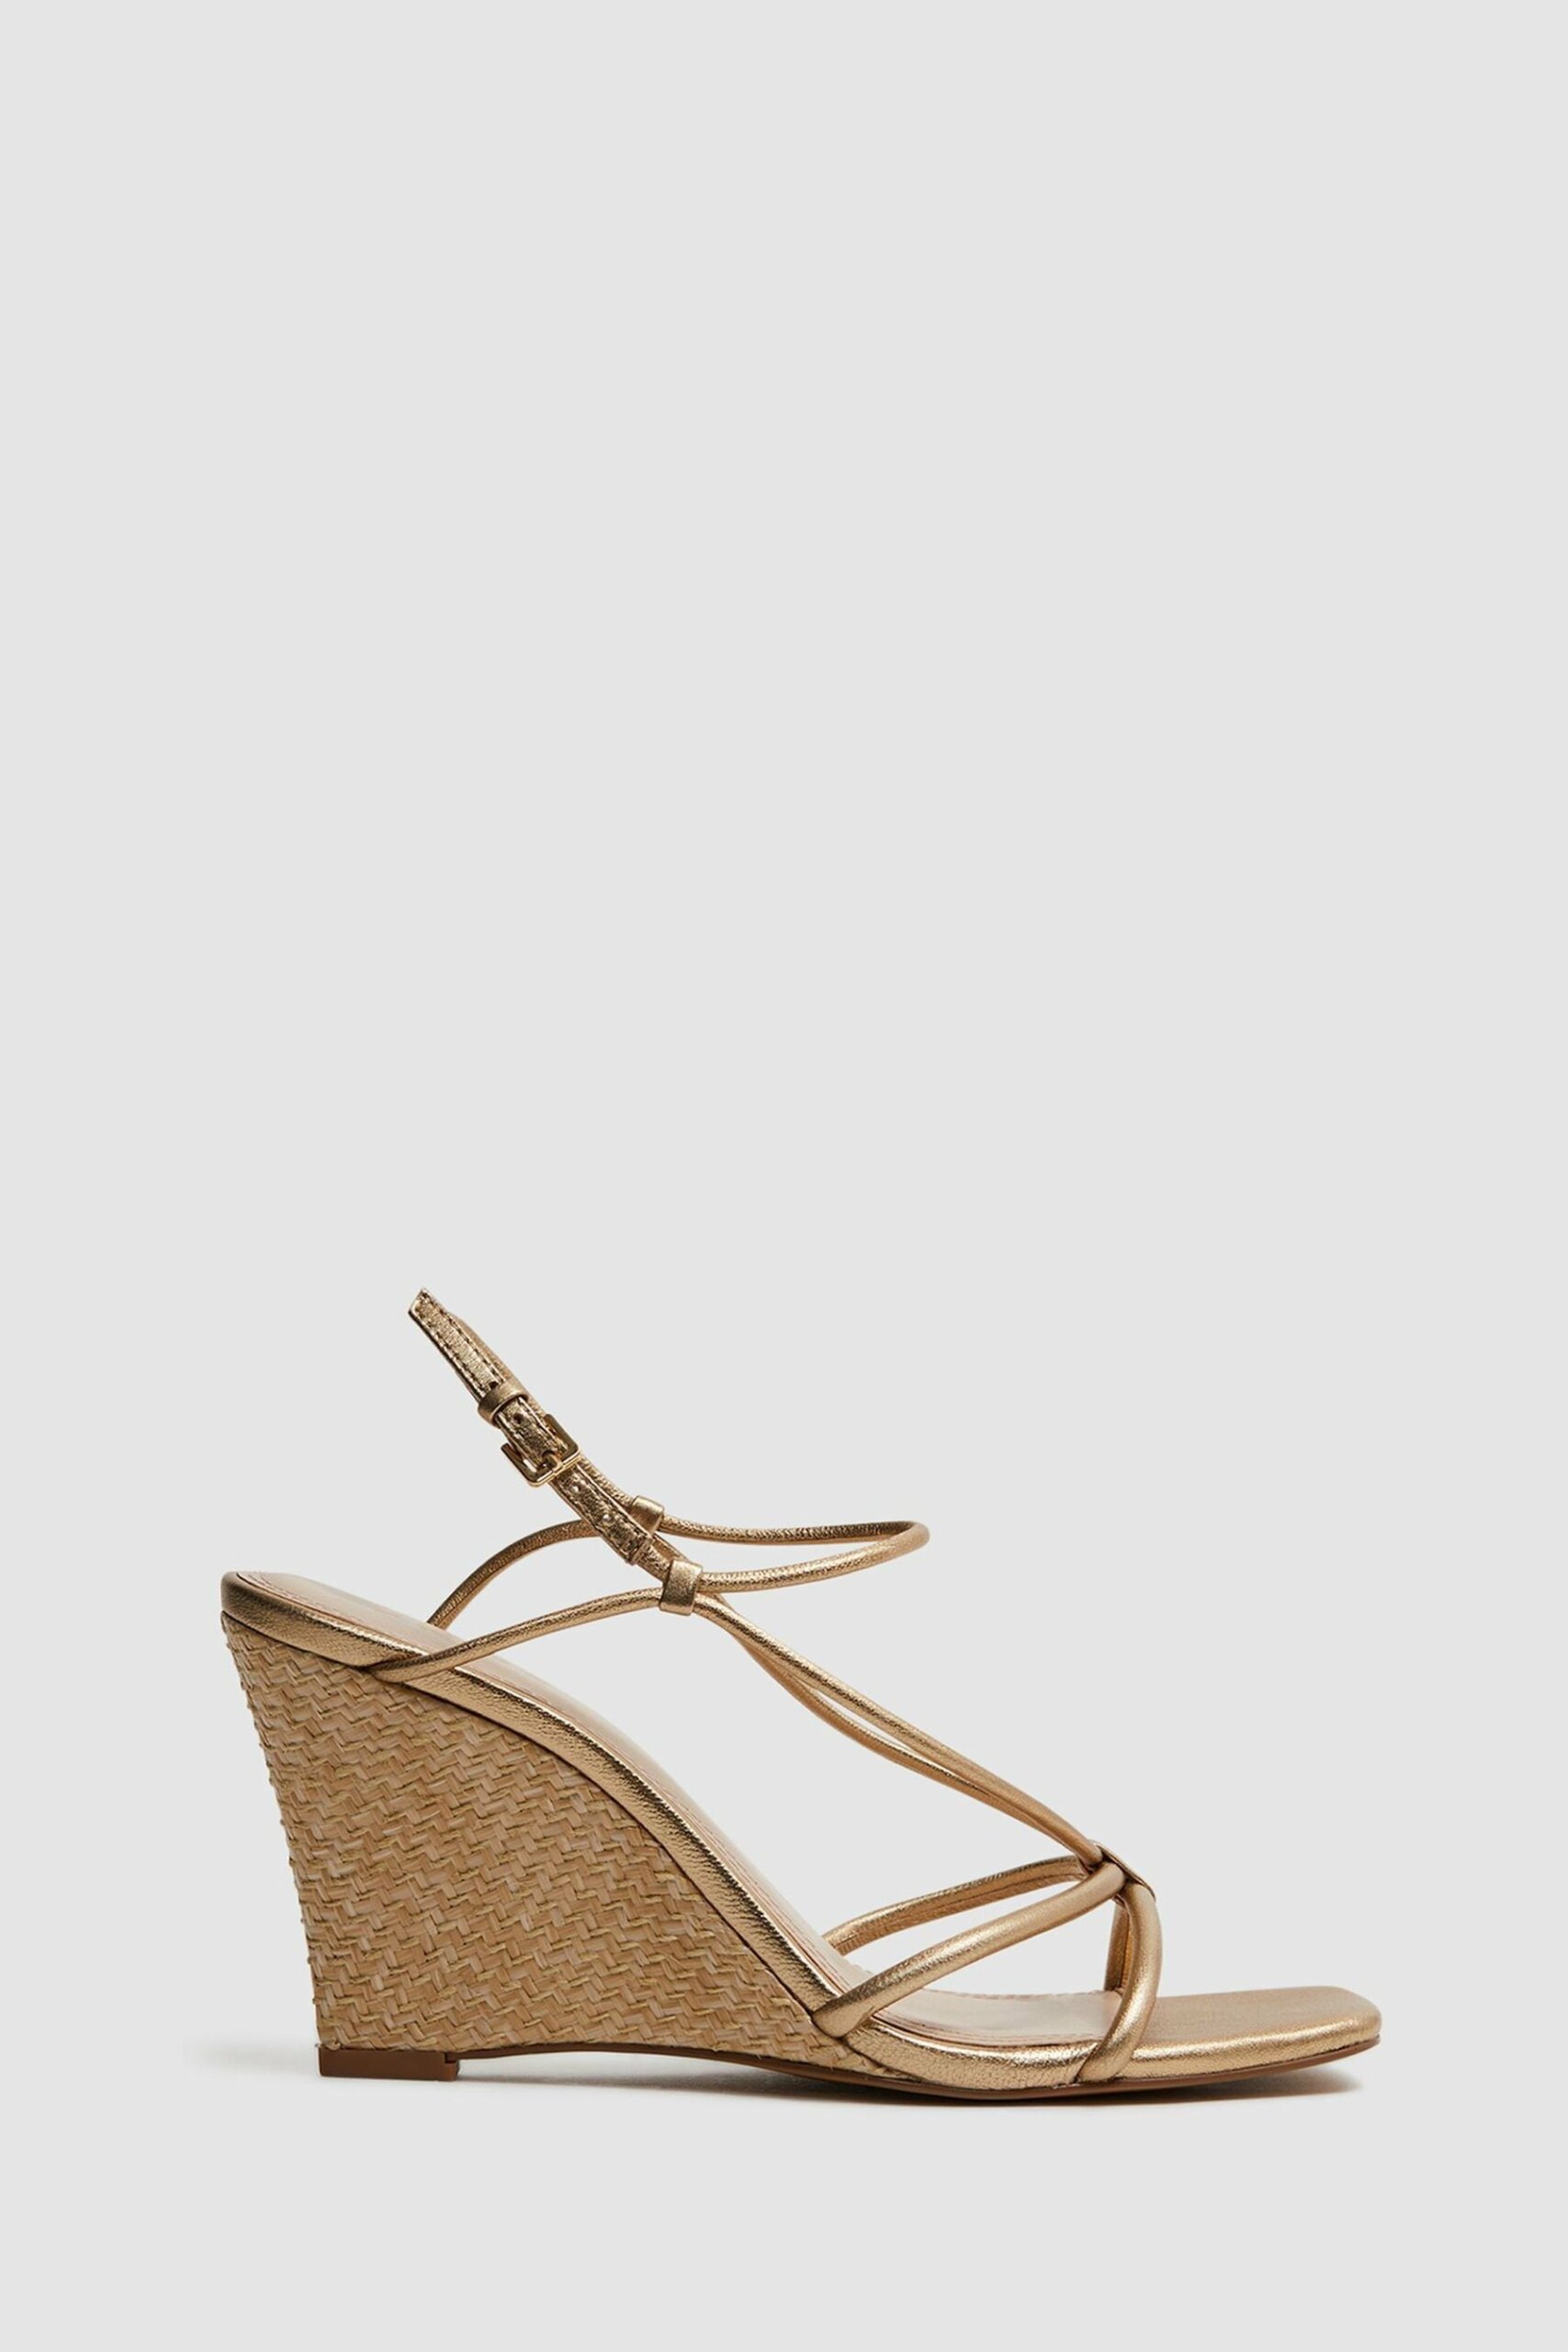 Daisey Strappy Wedge Heels - Bronze Leather Plain